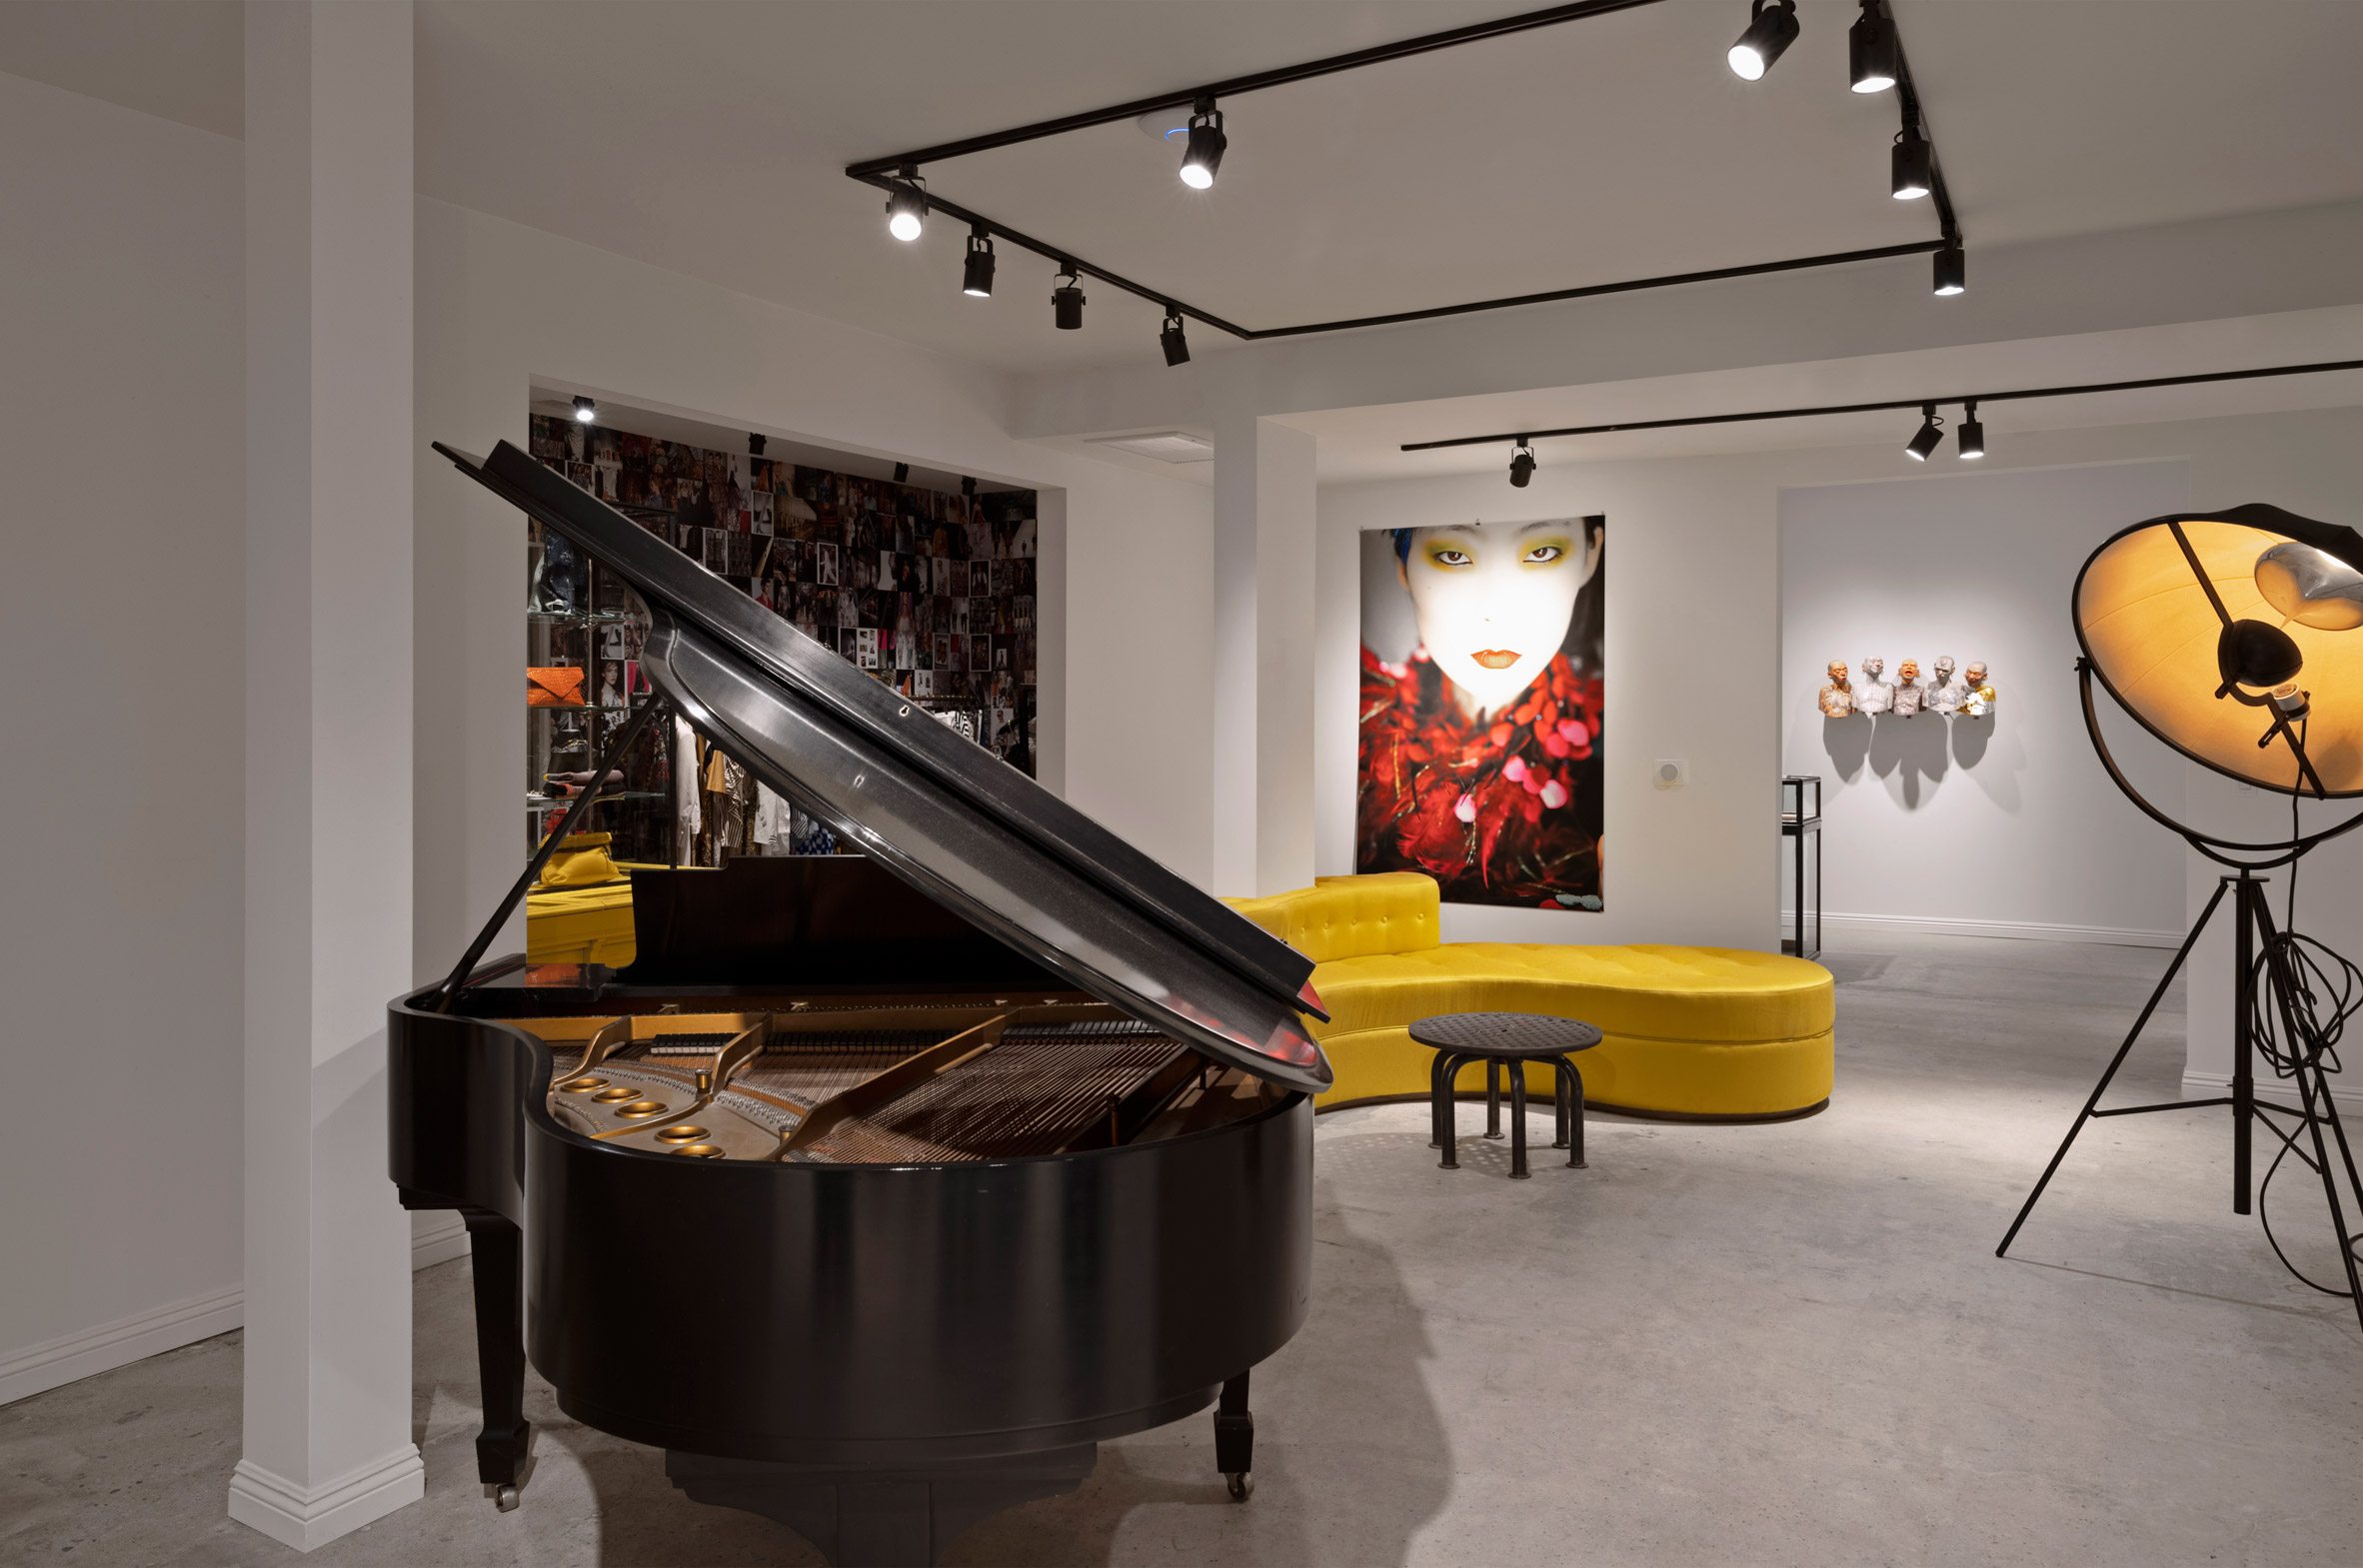 Dries Van Noten's first US store in Los Angeles features art from global creatives